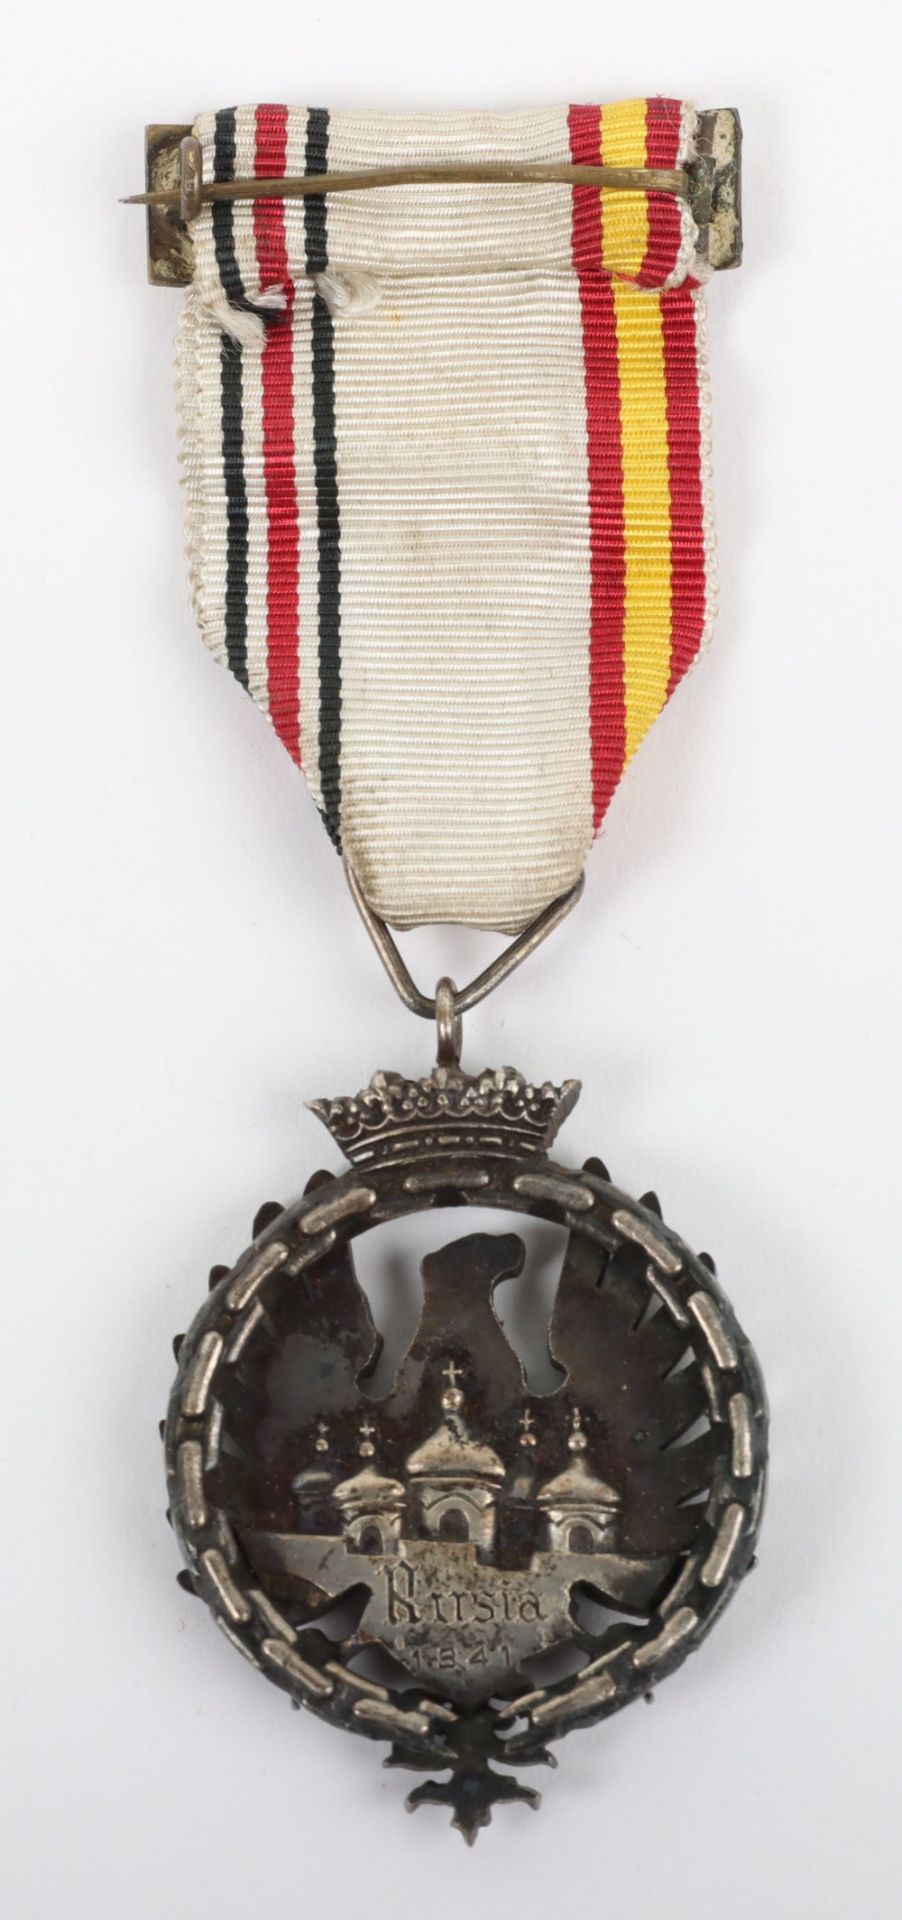 Spanish Volunteers Medal for Russia 1941 - Image 3 of 4